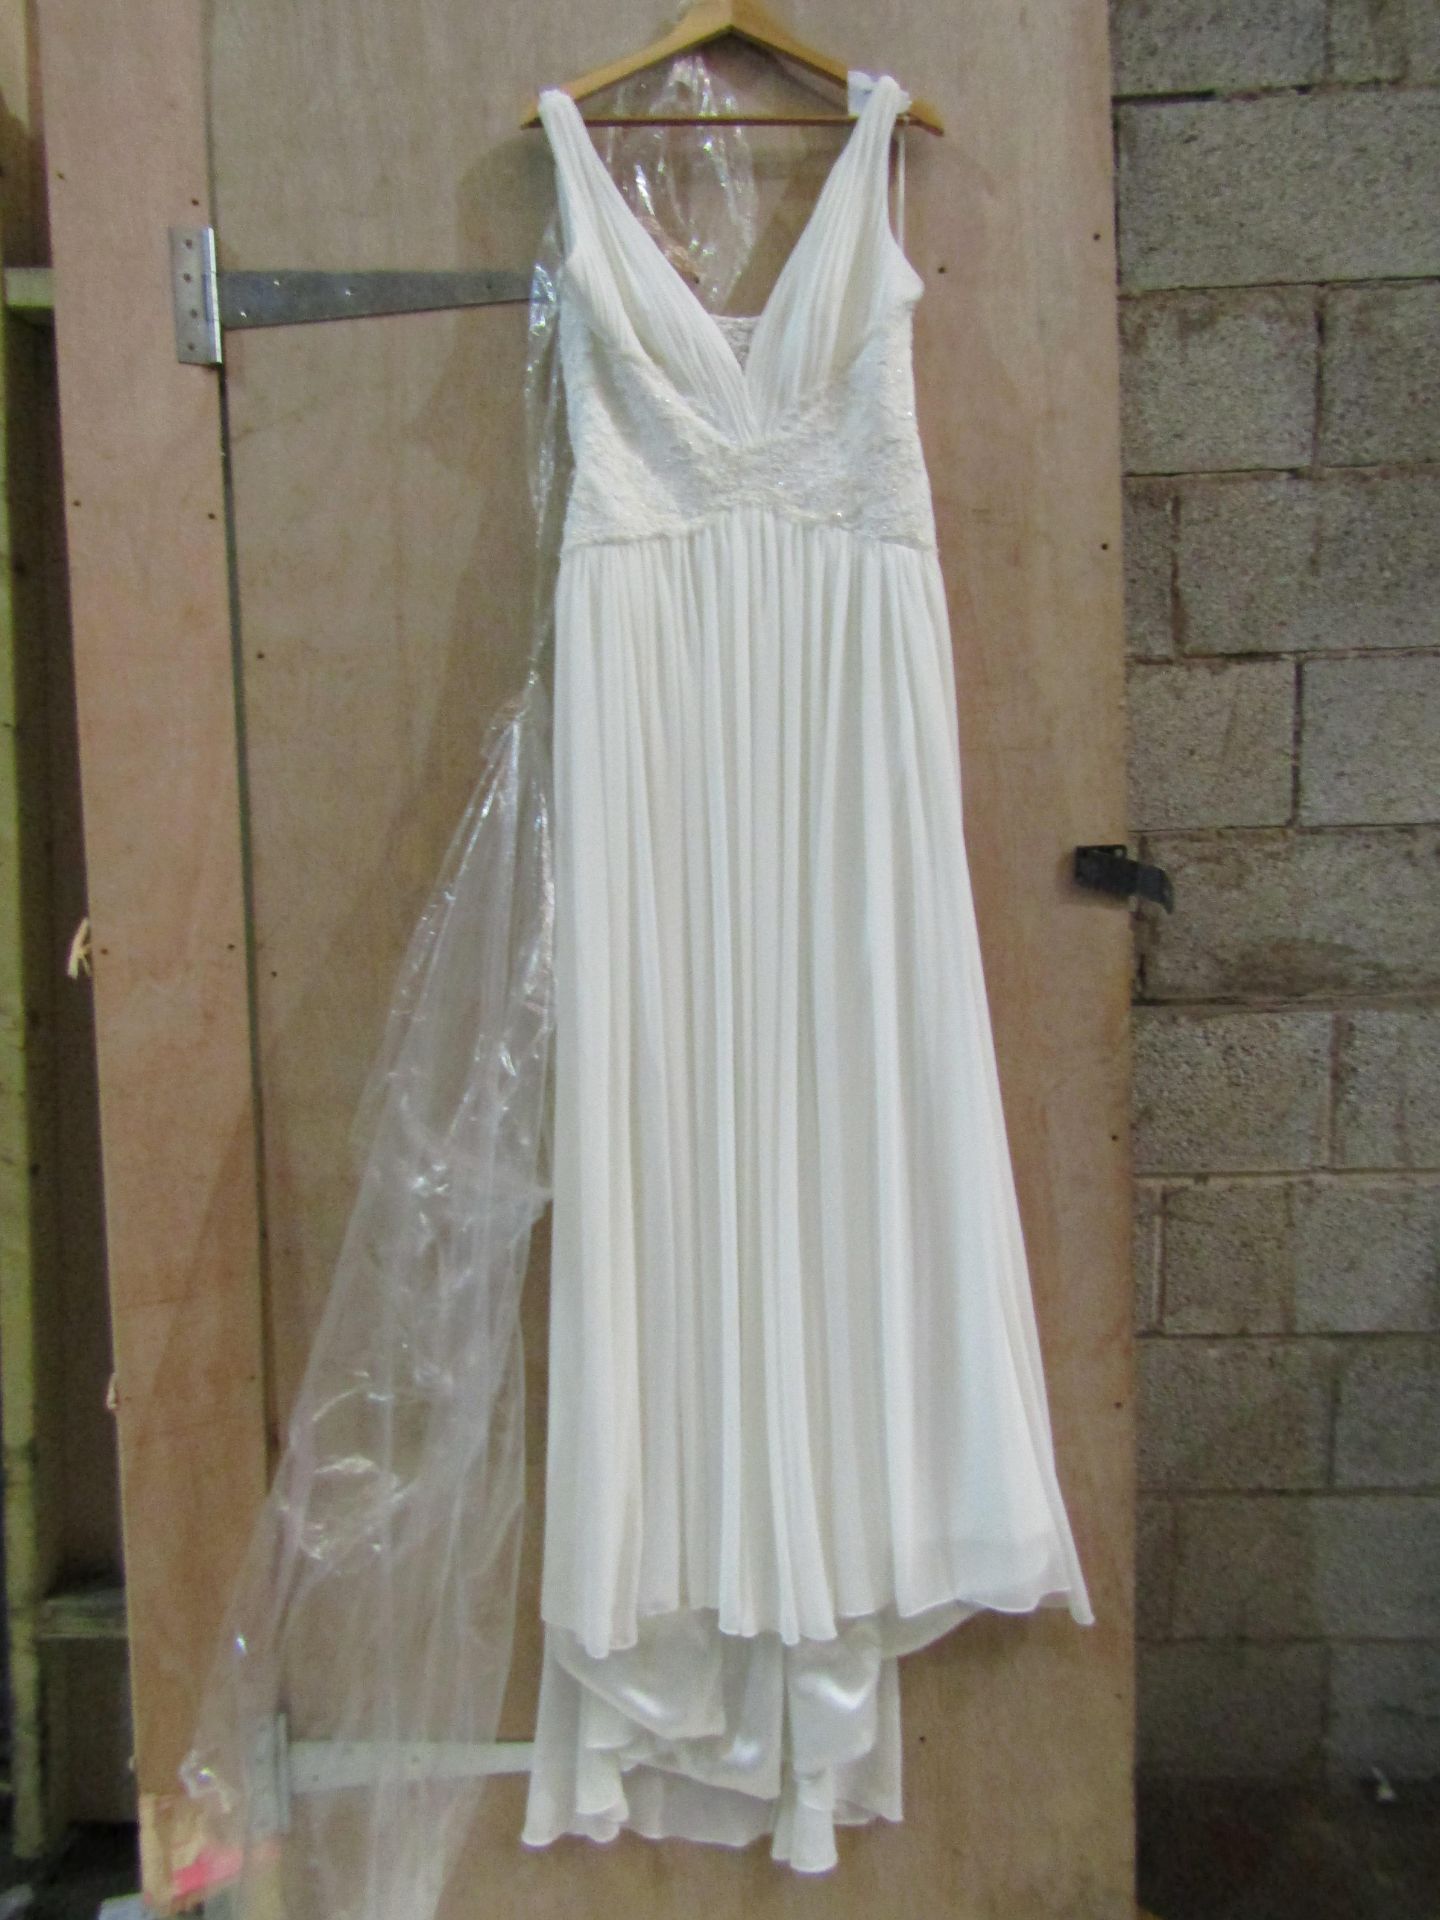 Approx 500 pieces of wedding shop stock to include wedding dresses, mother of the bride, dresses, - Image 34 of 43